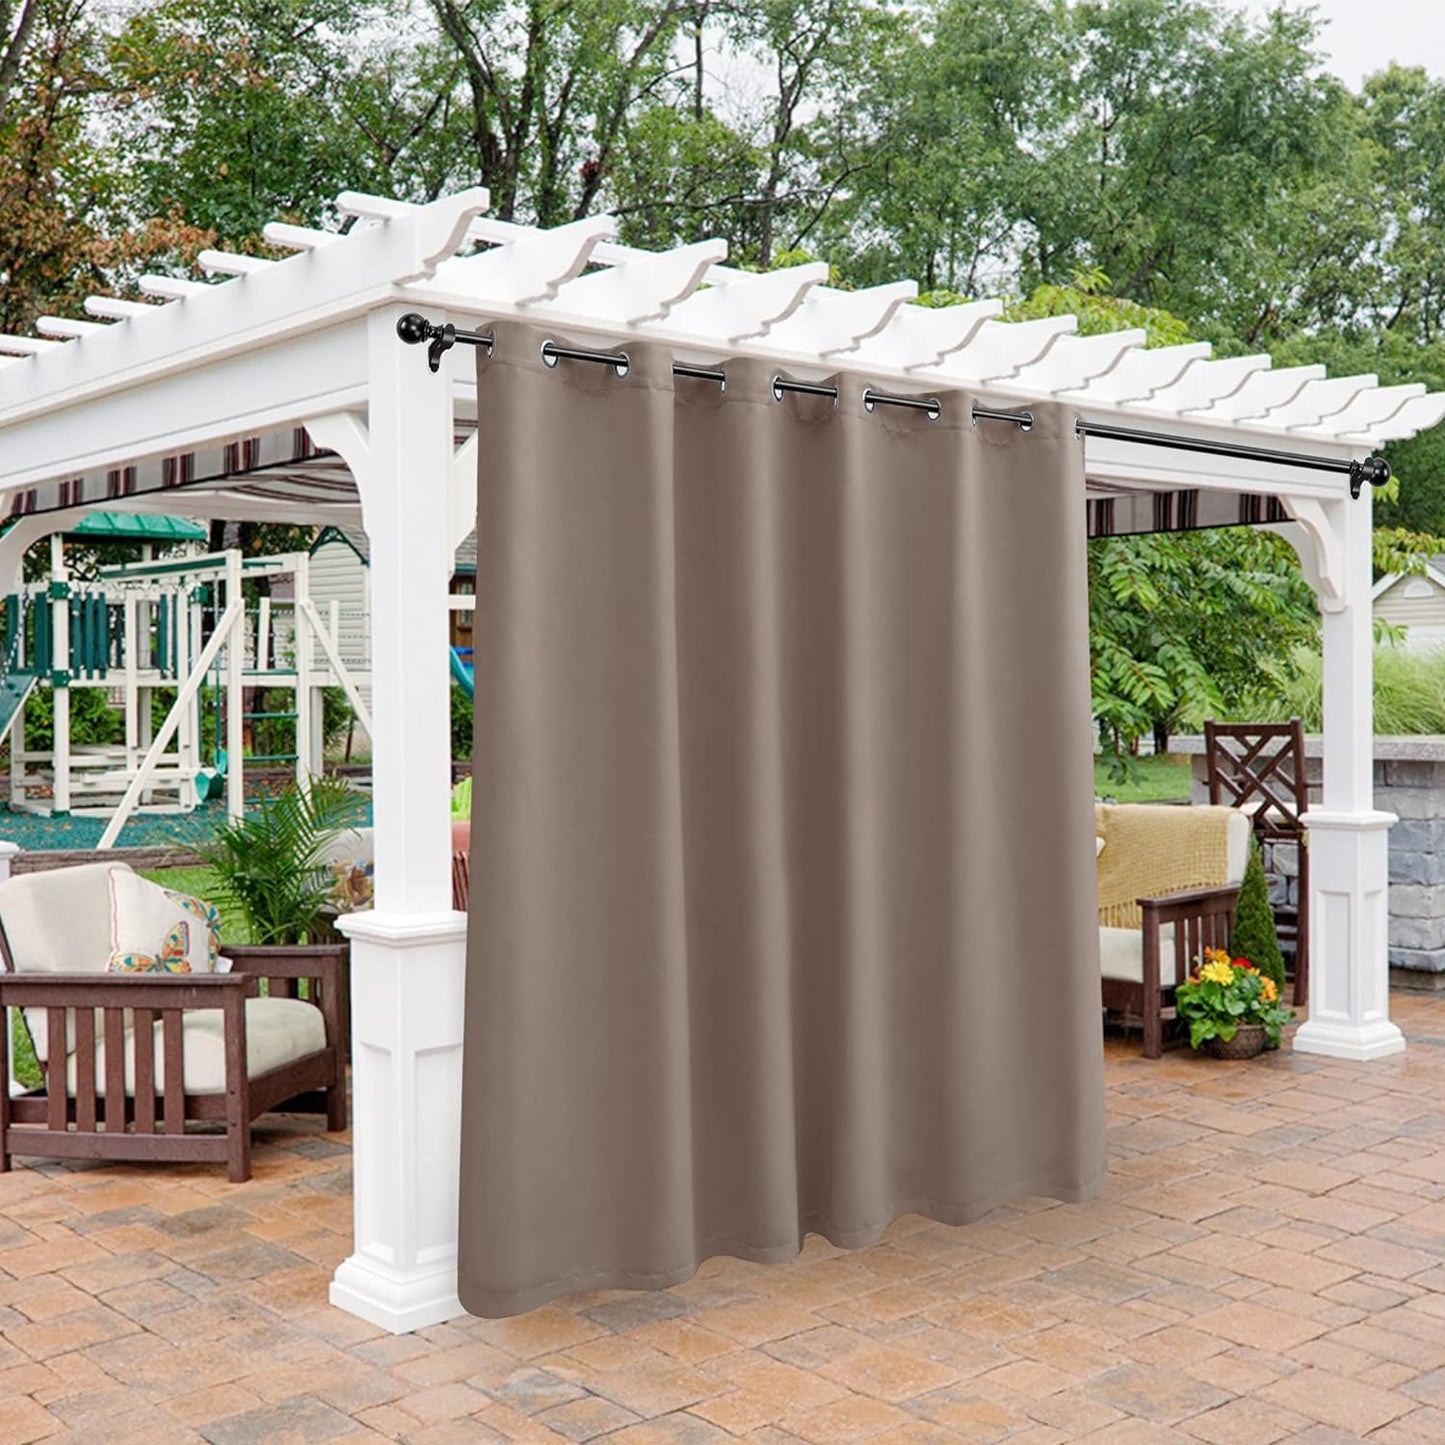 BONZER Outdoor Curtains for Patio Waterproof - Light Blocking Weather Resistant Privacy Grommet Blackout Curtains for Gazebo, Porch, Pergola, Cabana, Deck, Sunroom, 1 Panel, 52W X 84L Inch, Silver  BONZER Khaki 100W X 95 Inch 